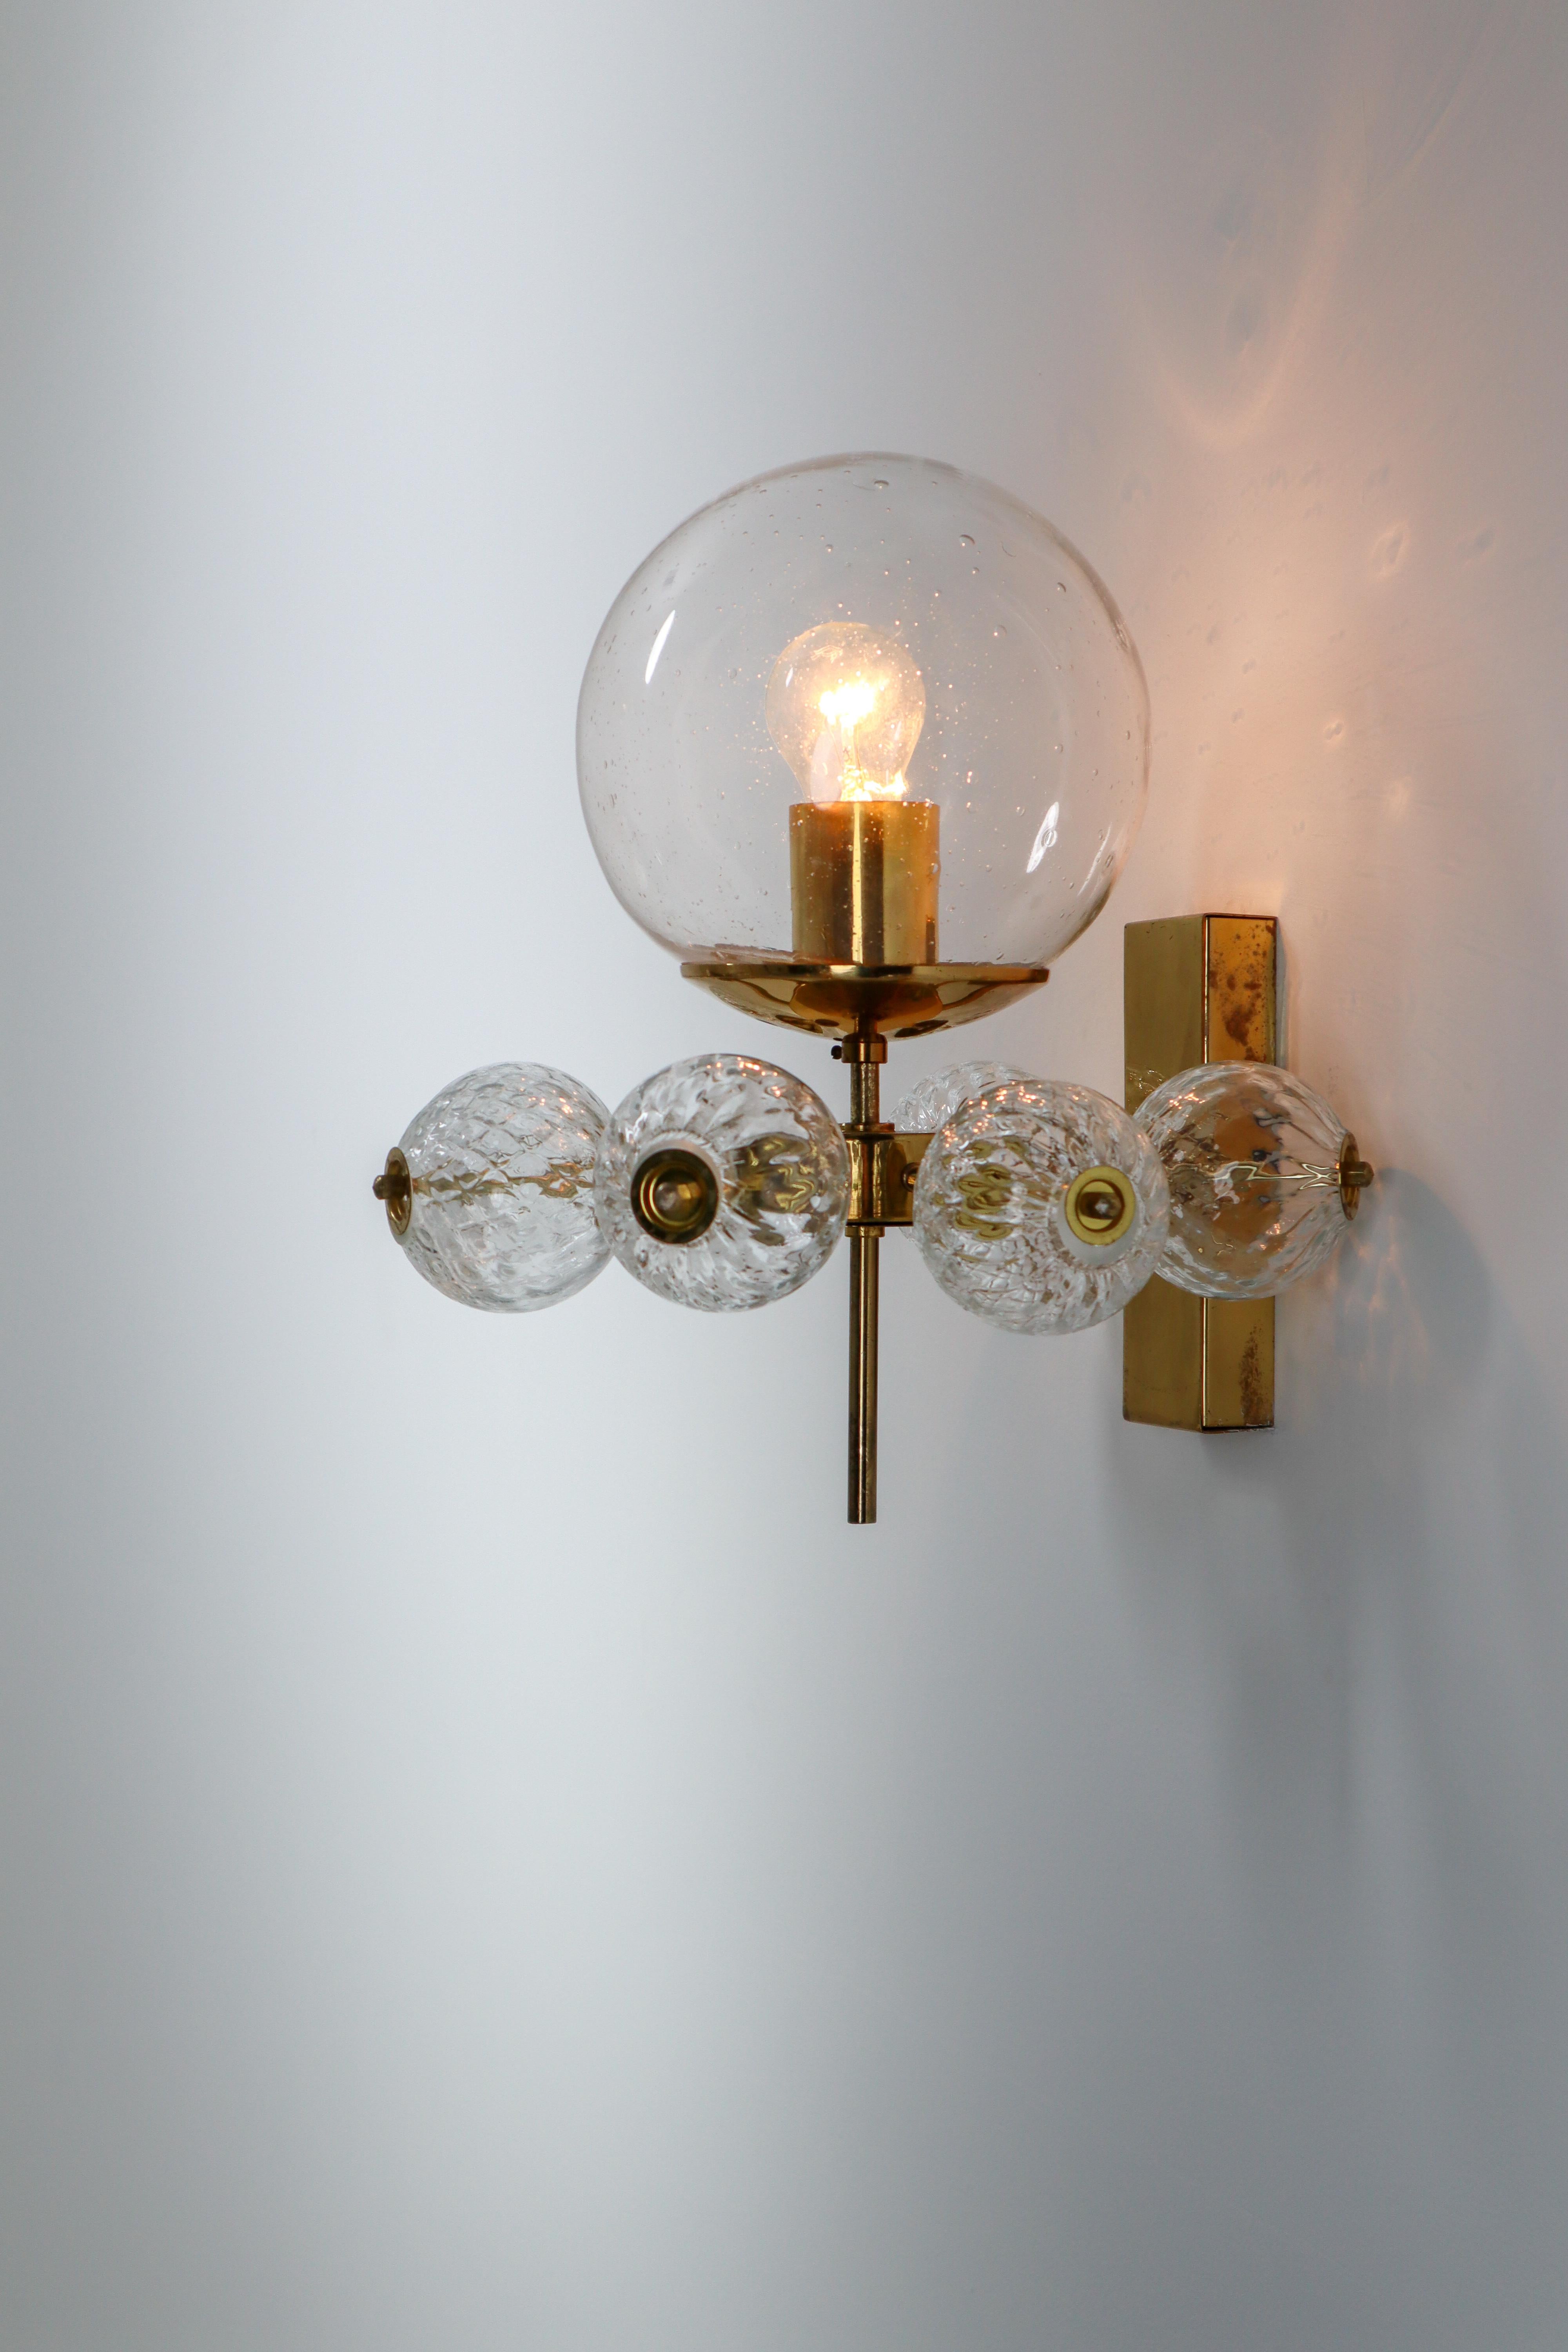 Hotel Wall Chandeliers with Brass Fixture, European, 1970s For Sale 3